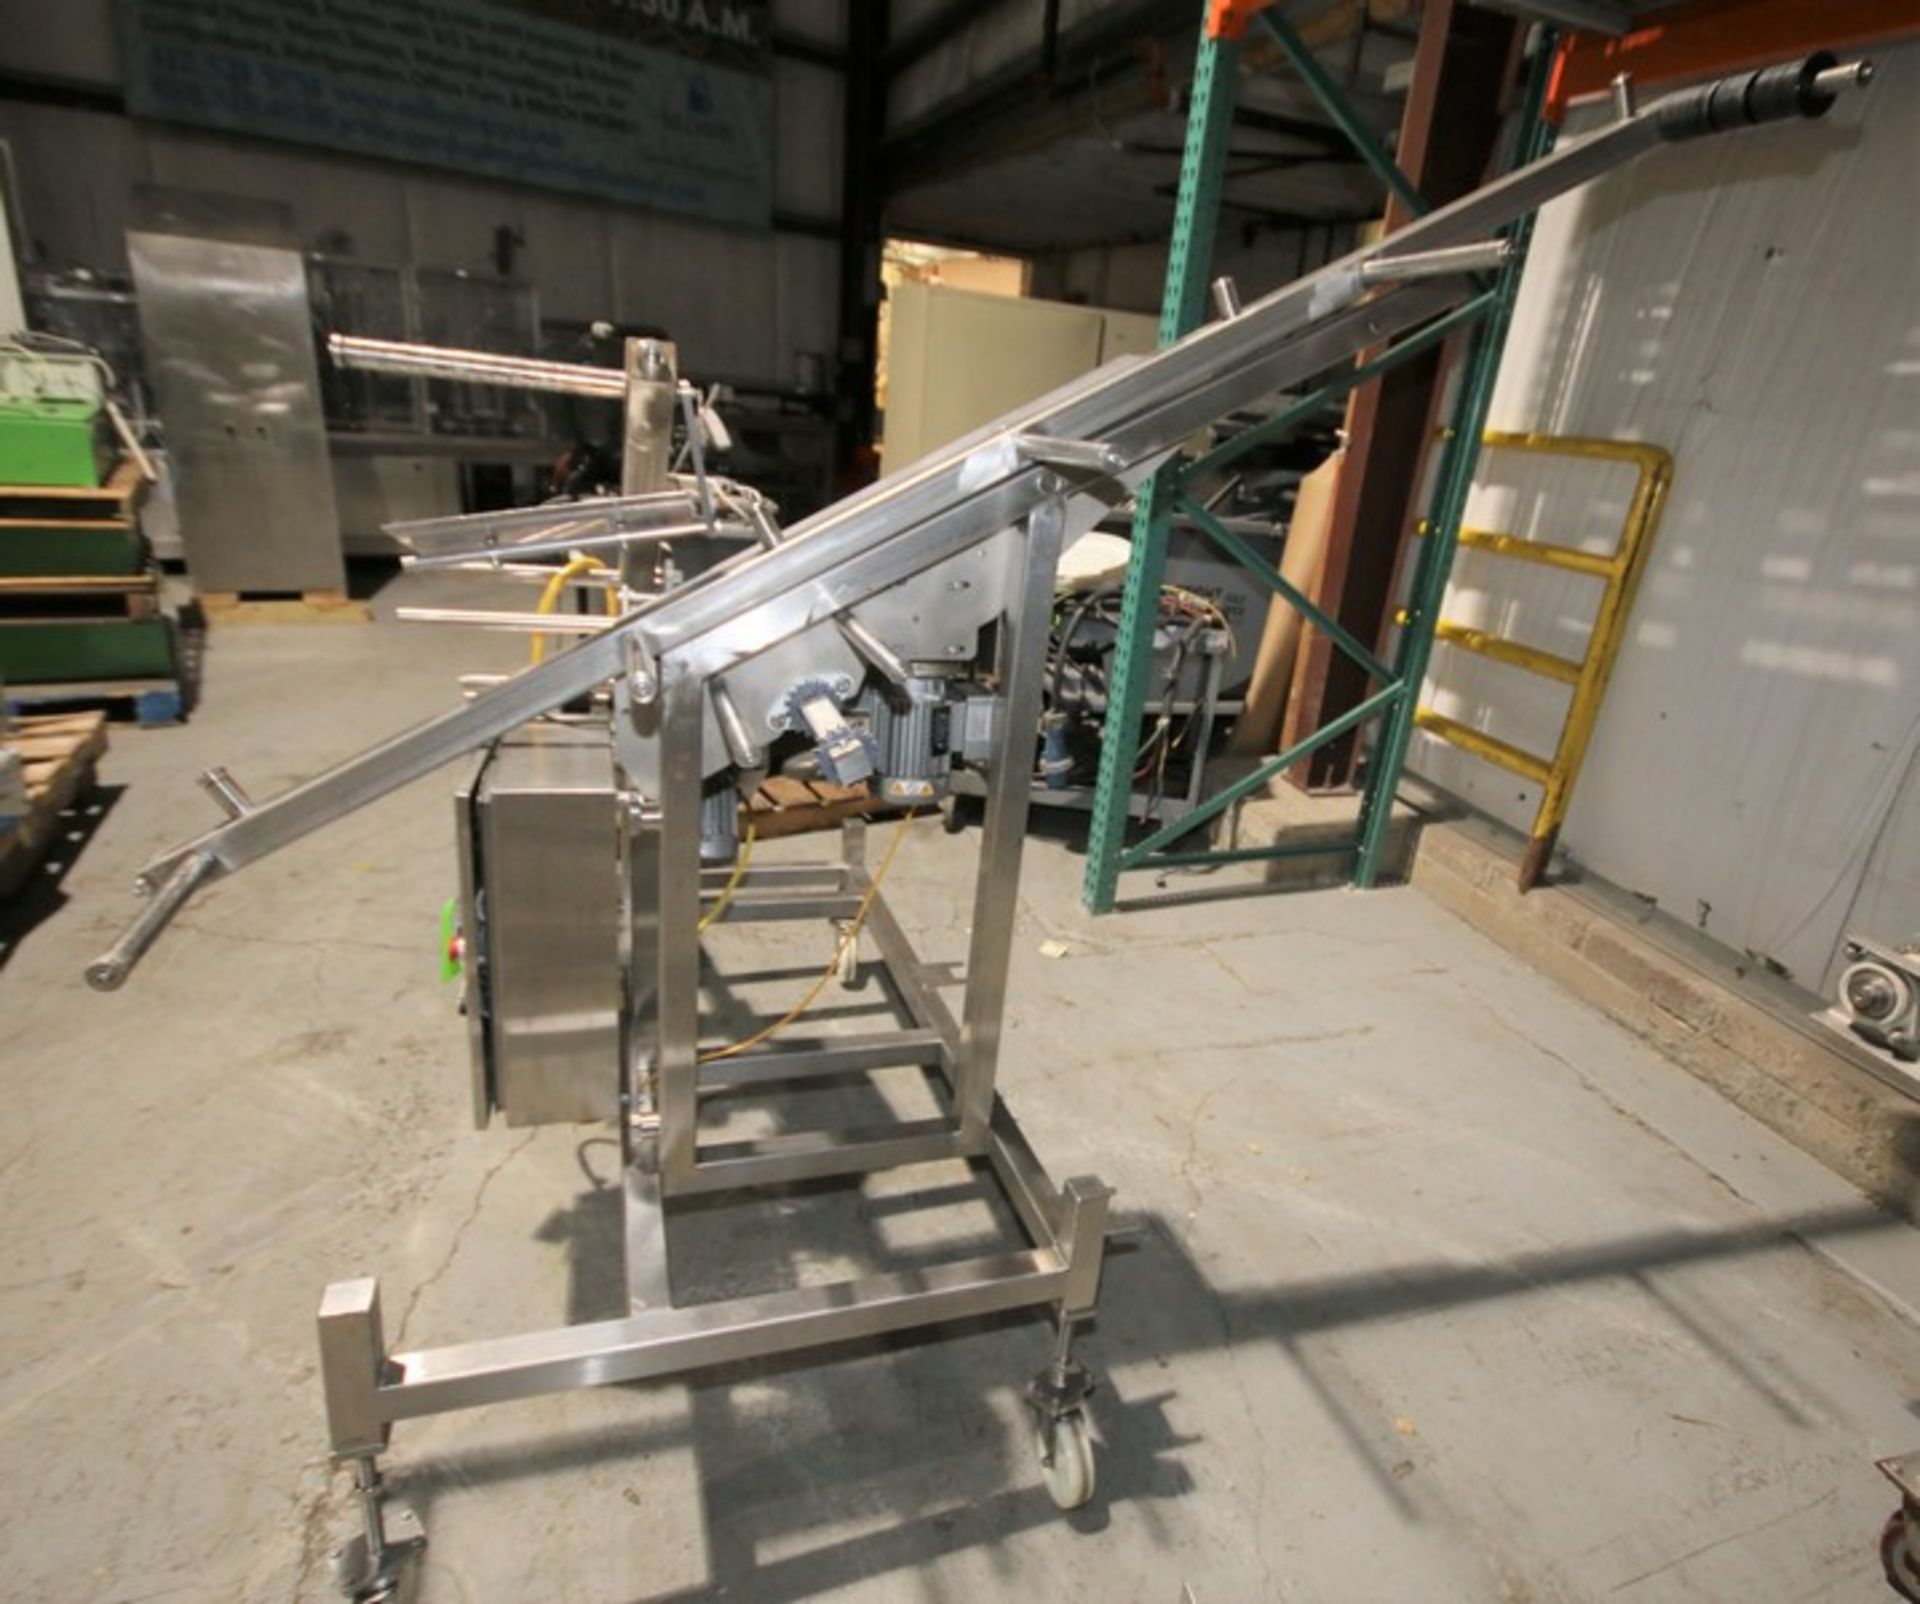 90 Degree Inclined S/S Belt Conveyor System 10” W, with Drive Motors, Control Cabinet with Allen - Image 3 of 5